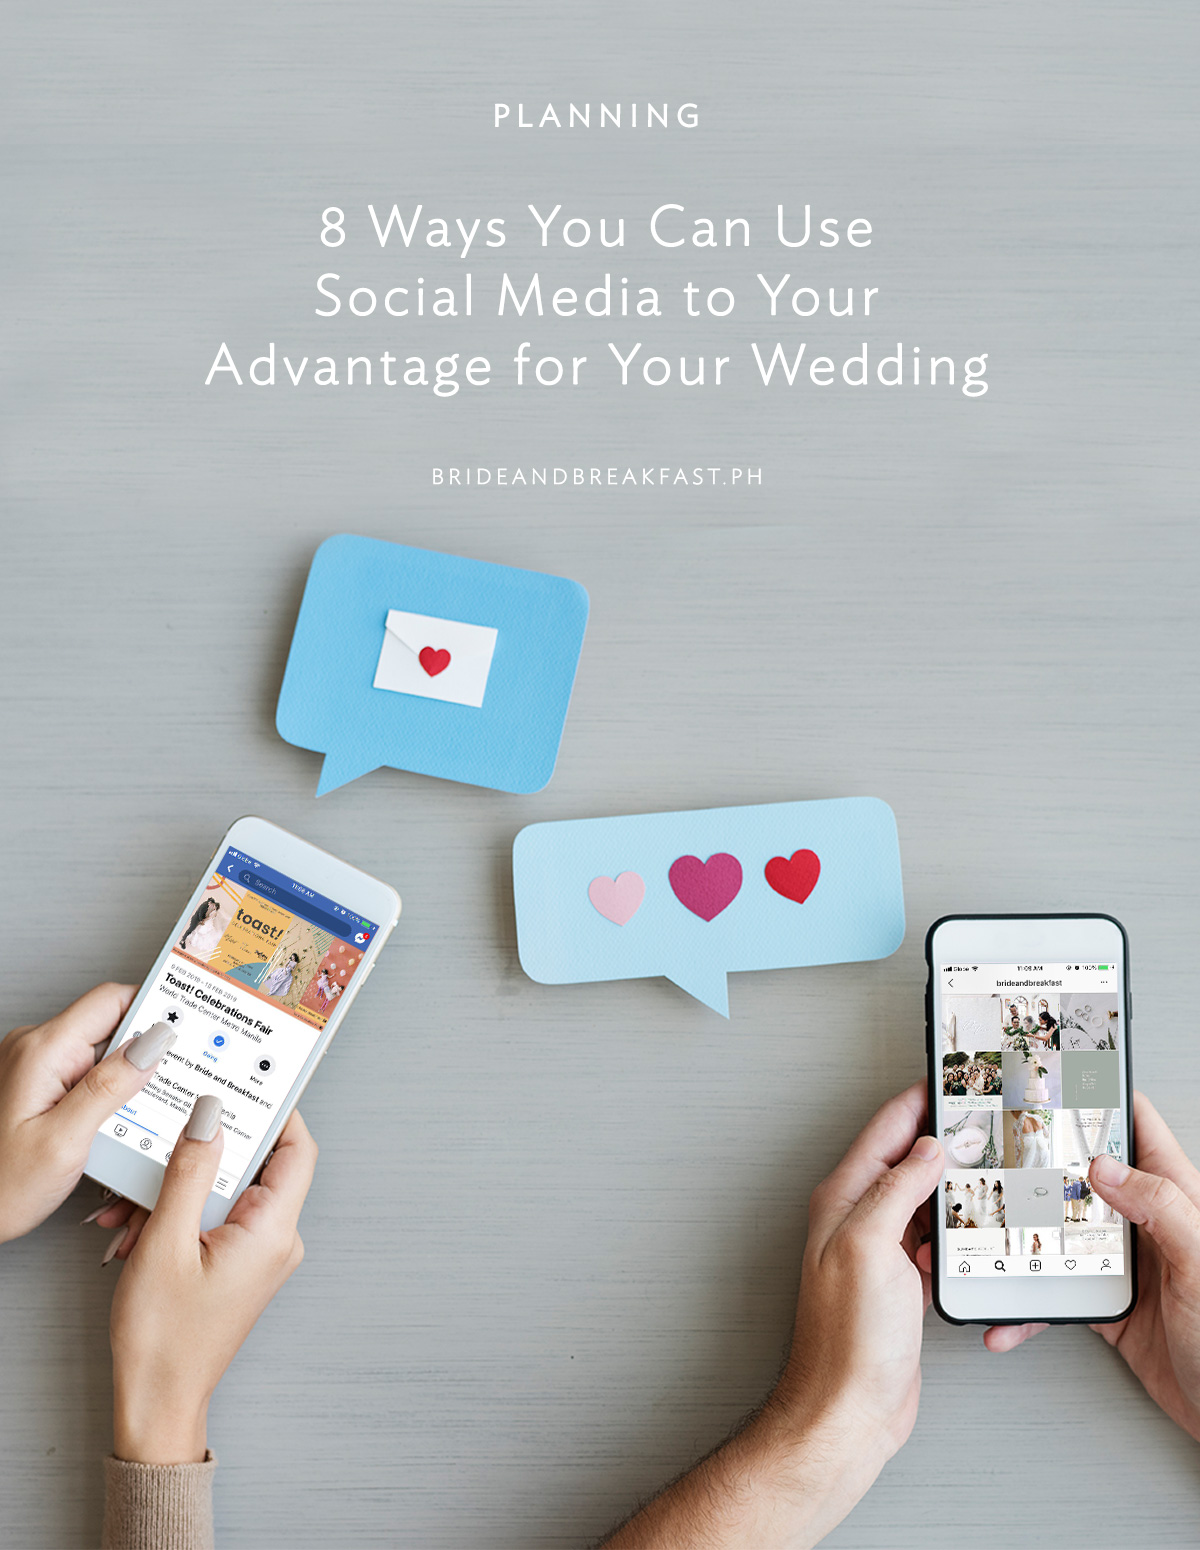 8 Ways You Can Use Social Media to Your Advantage for Your Wedding